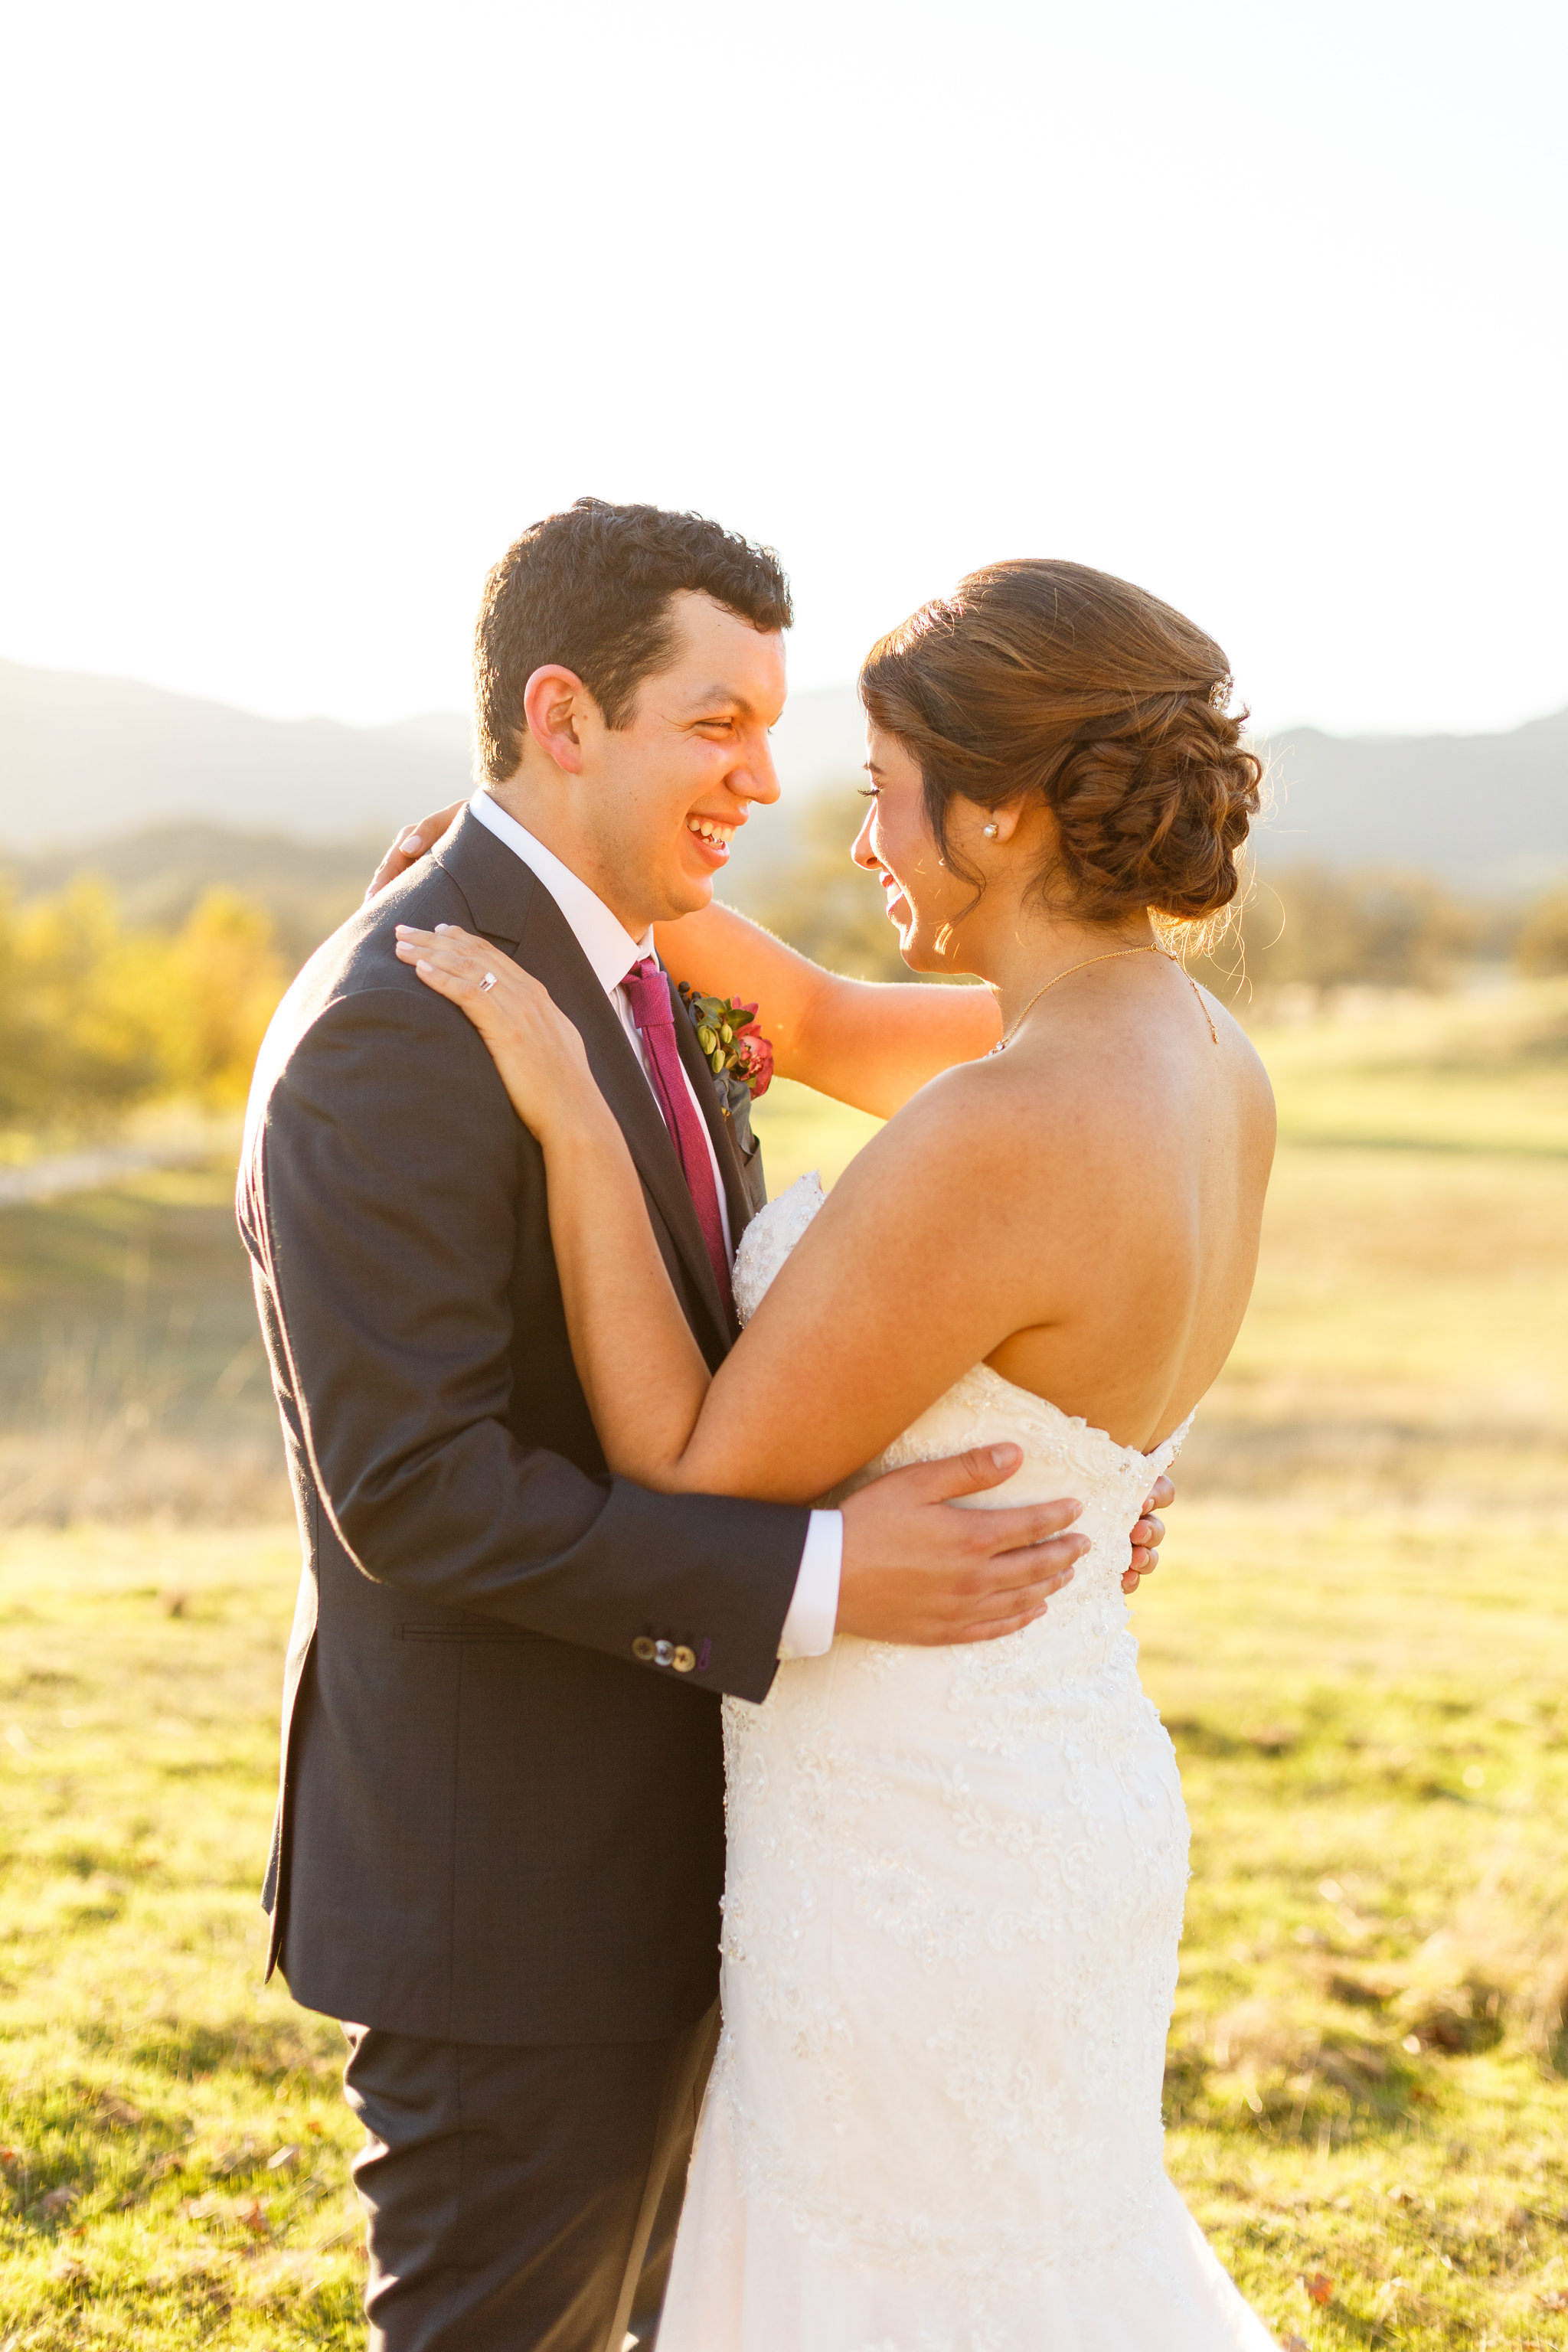 Bride and groom portraits during sunset after wedding at Spanish Oaks Ranch